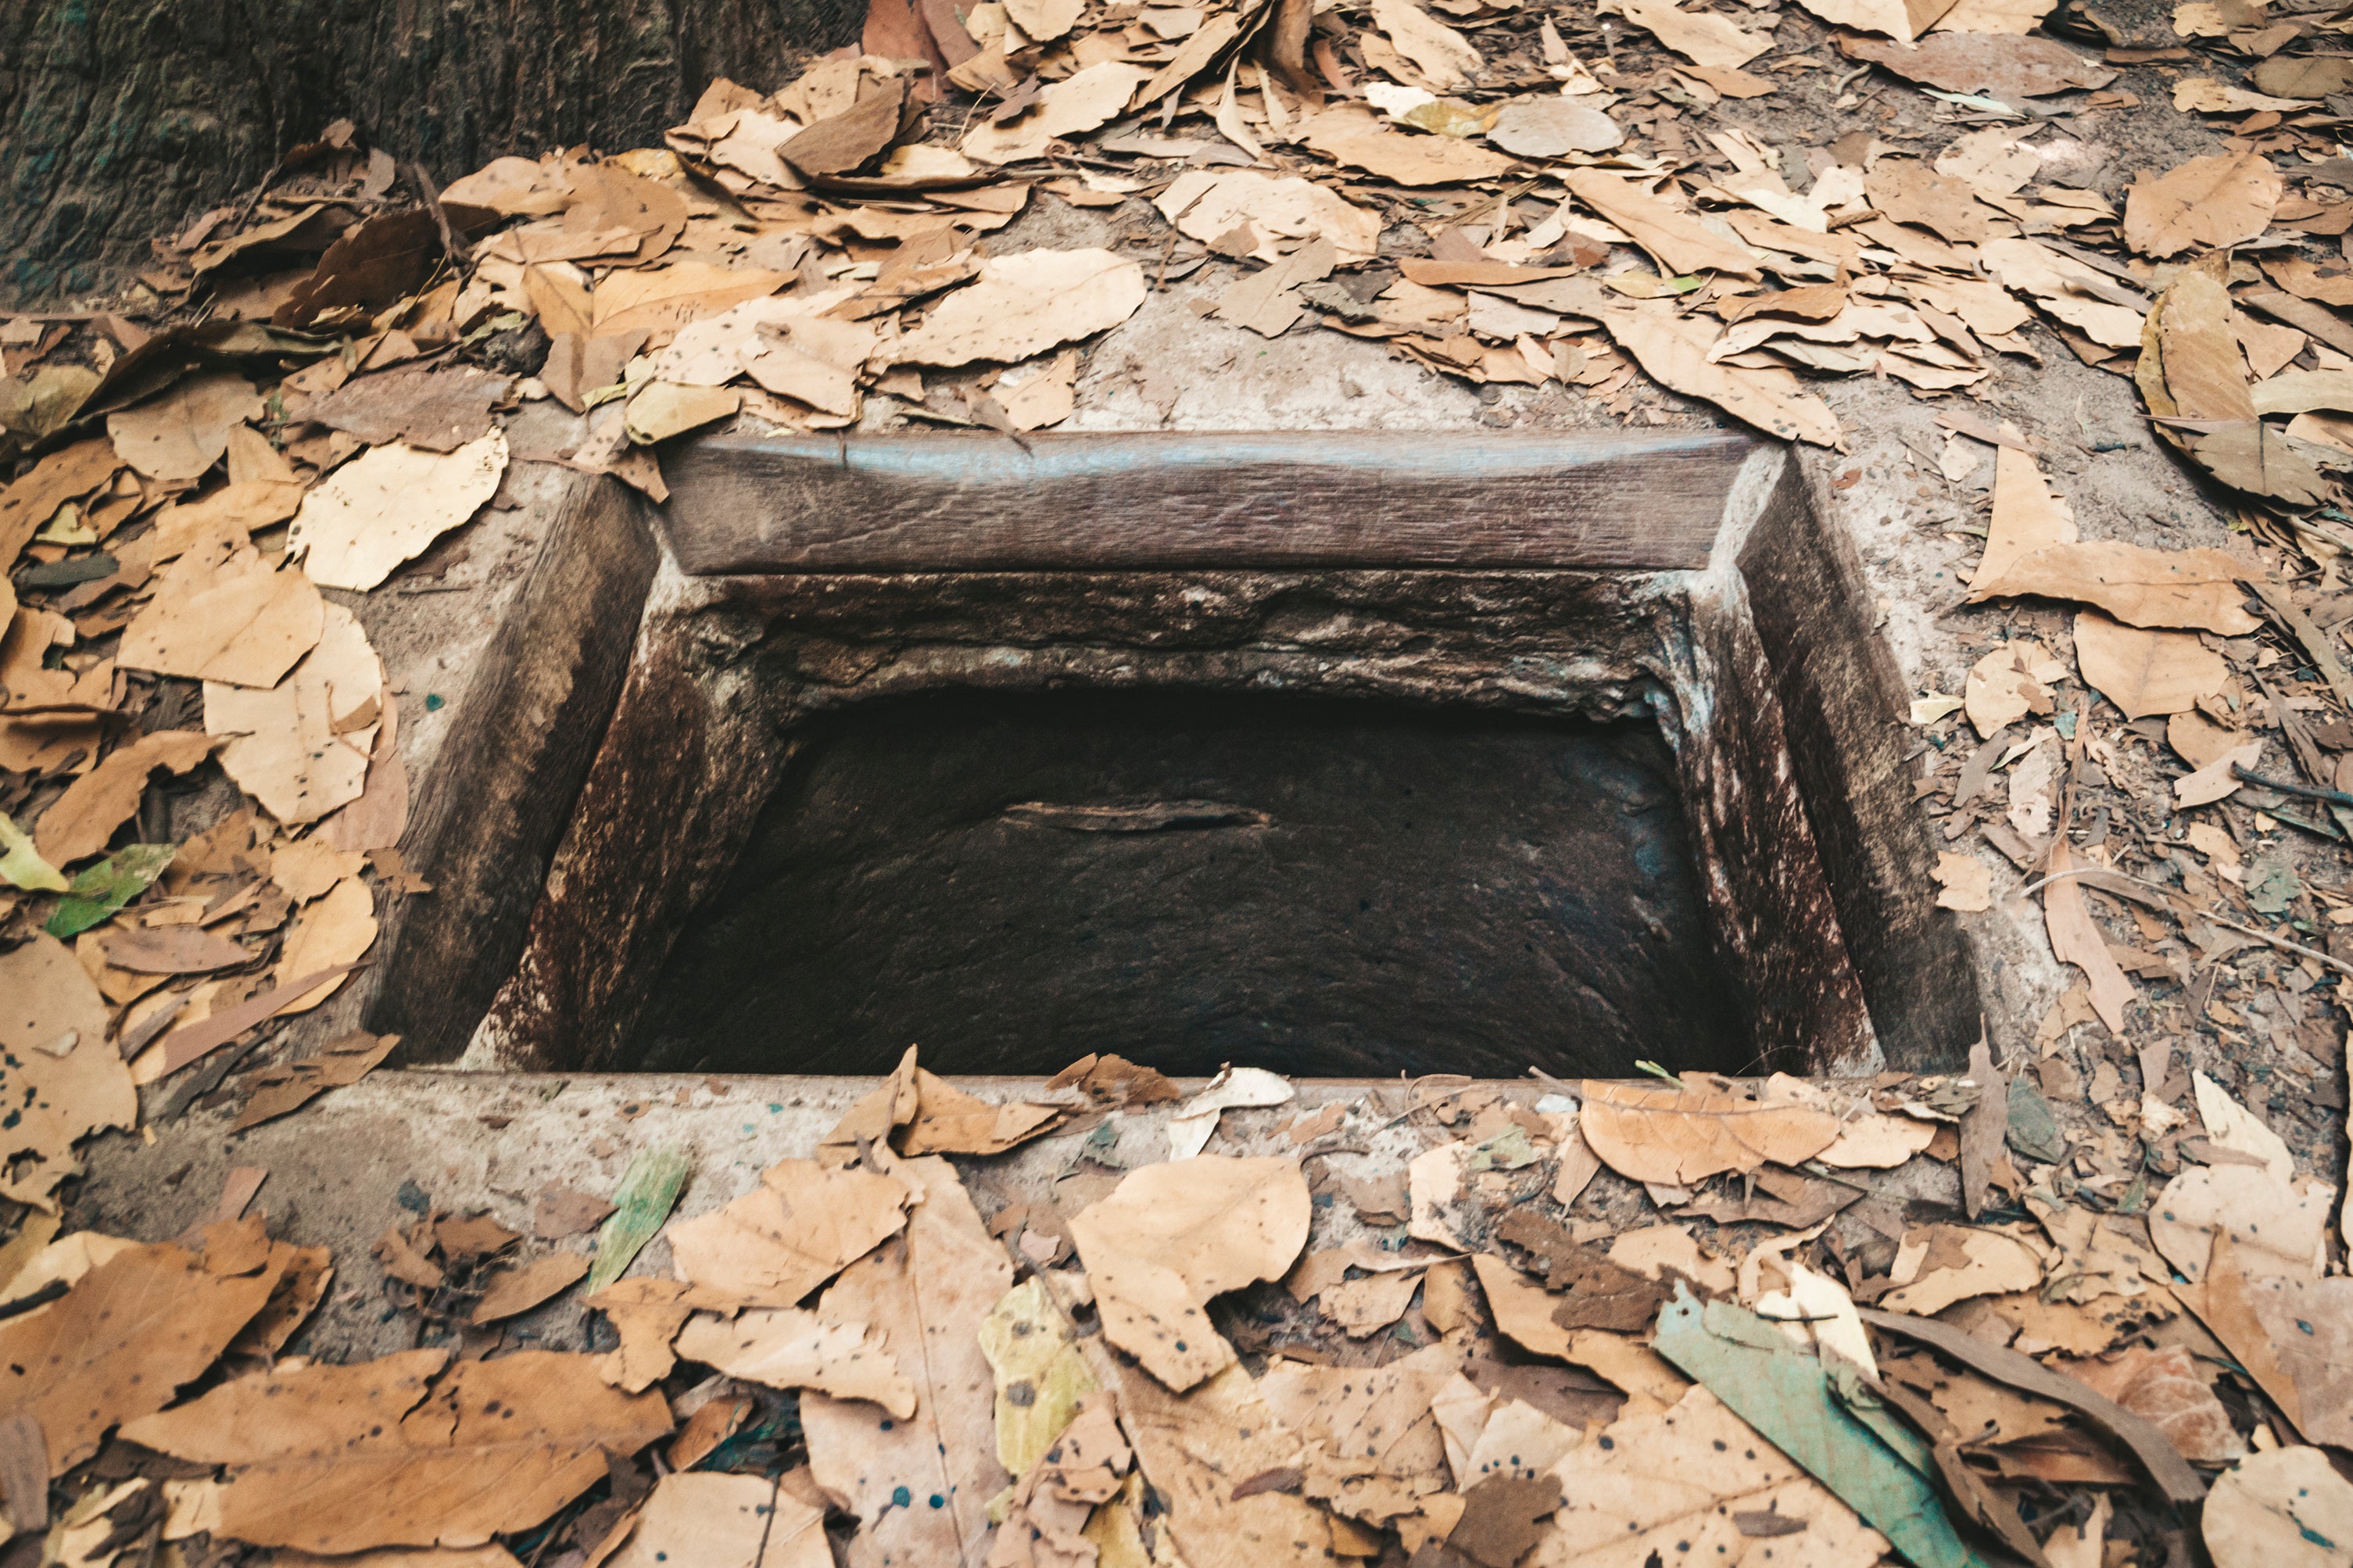 Introduction to Cu Chi Tunnels Diagram